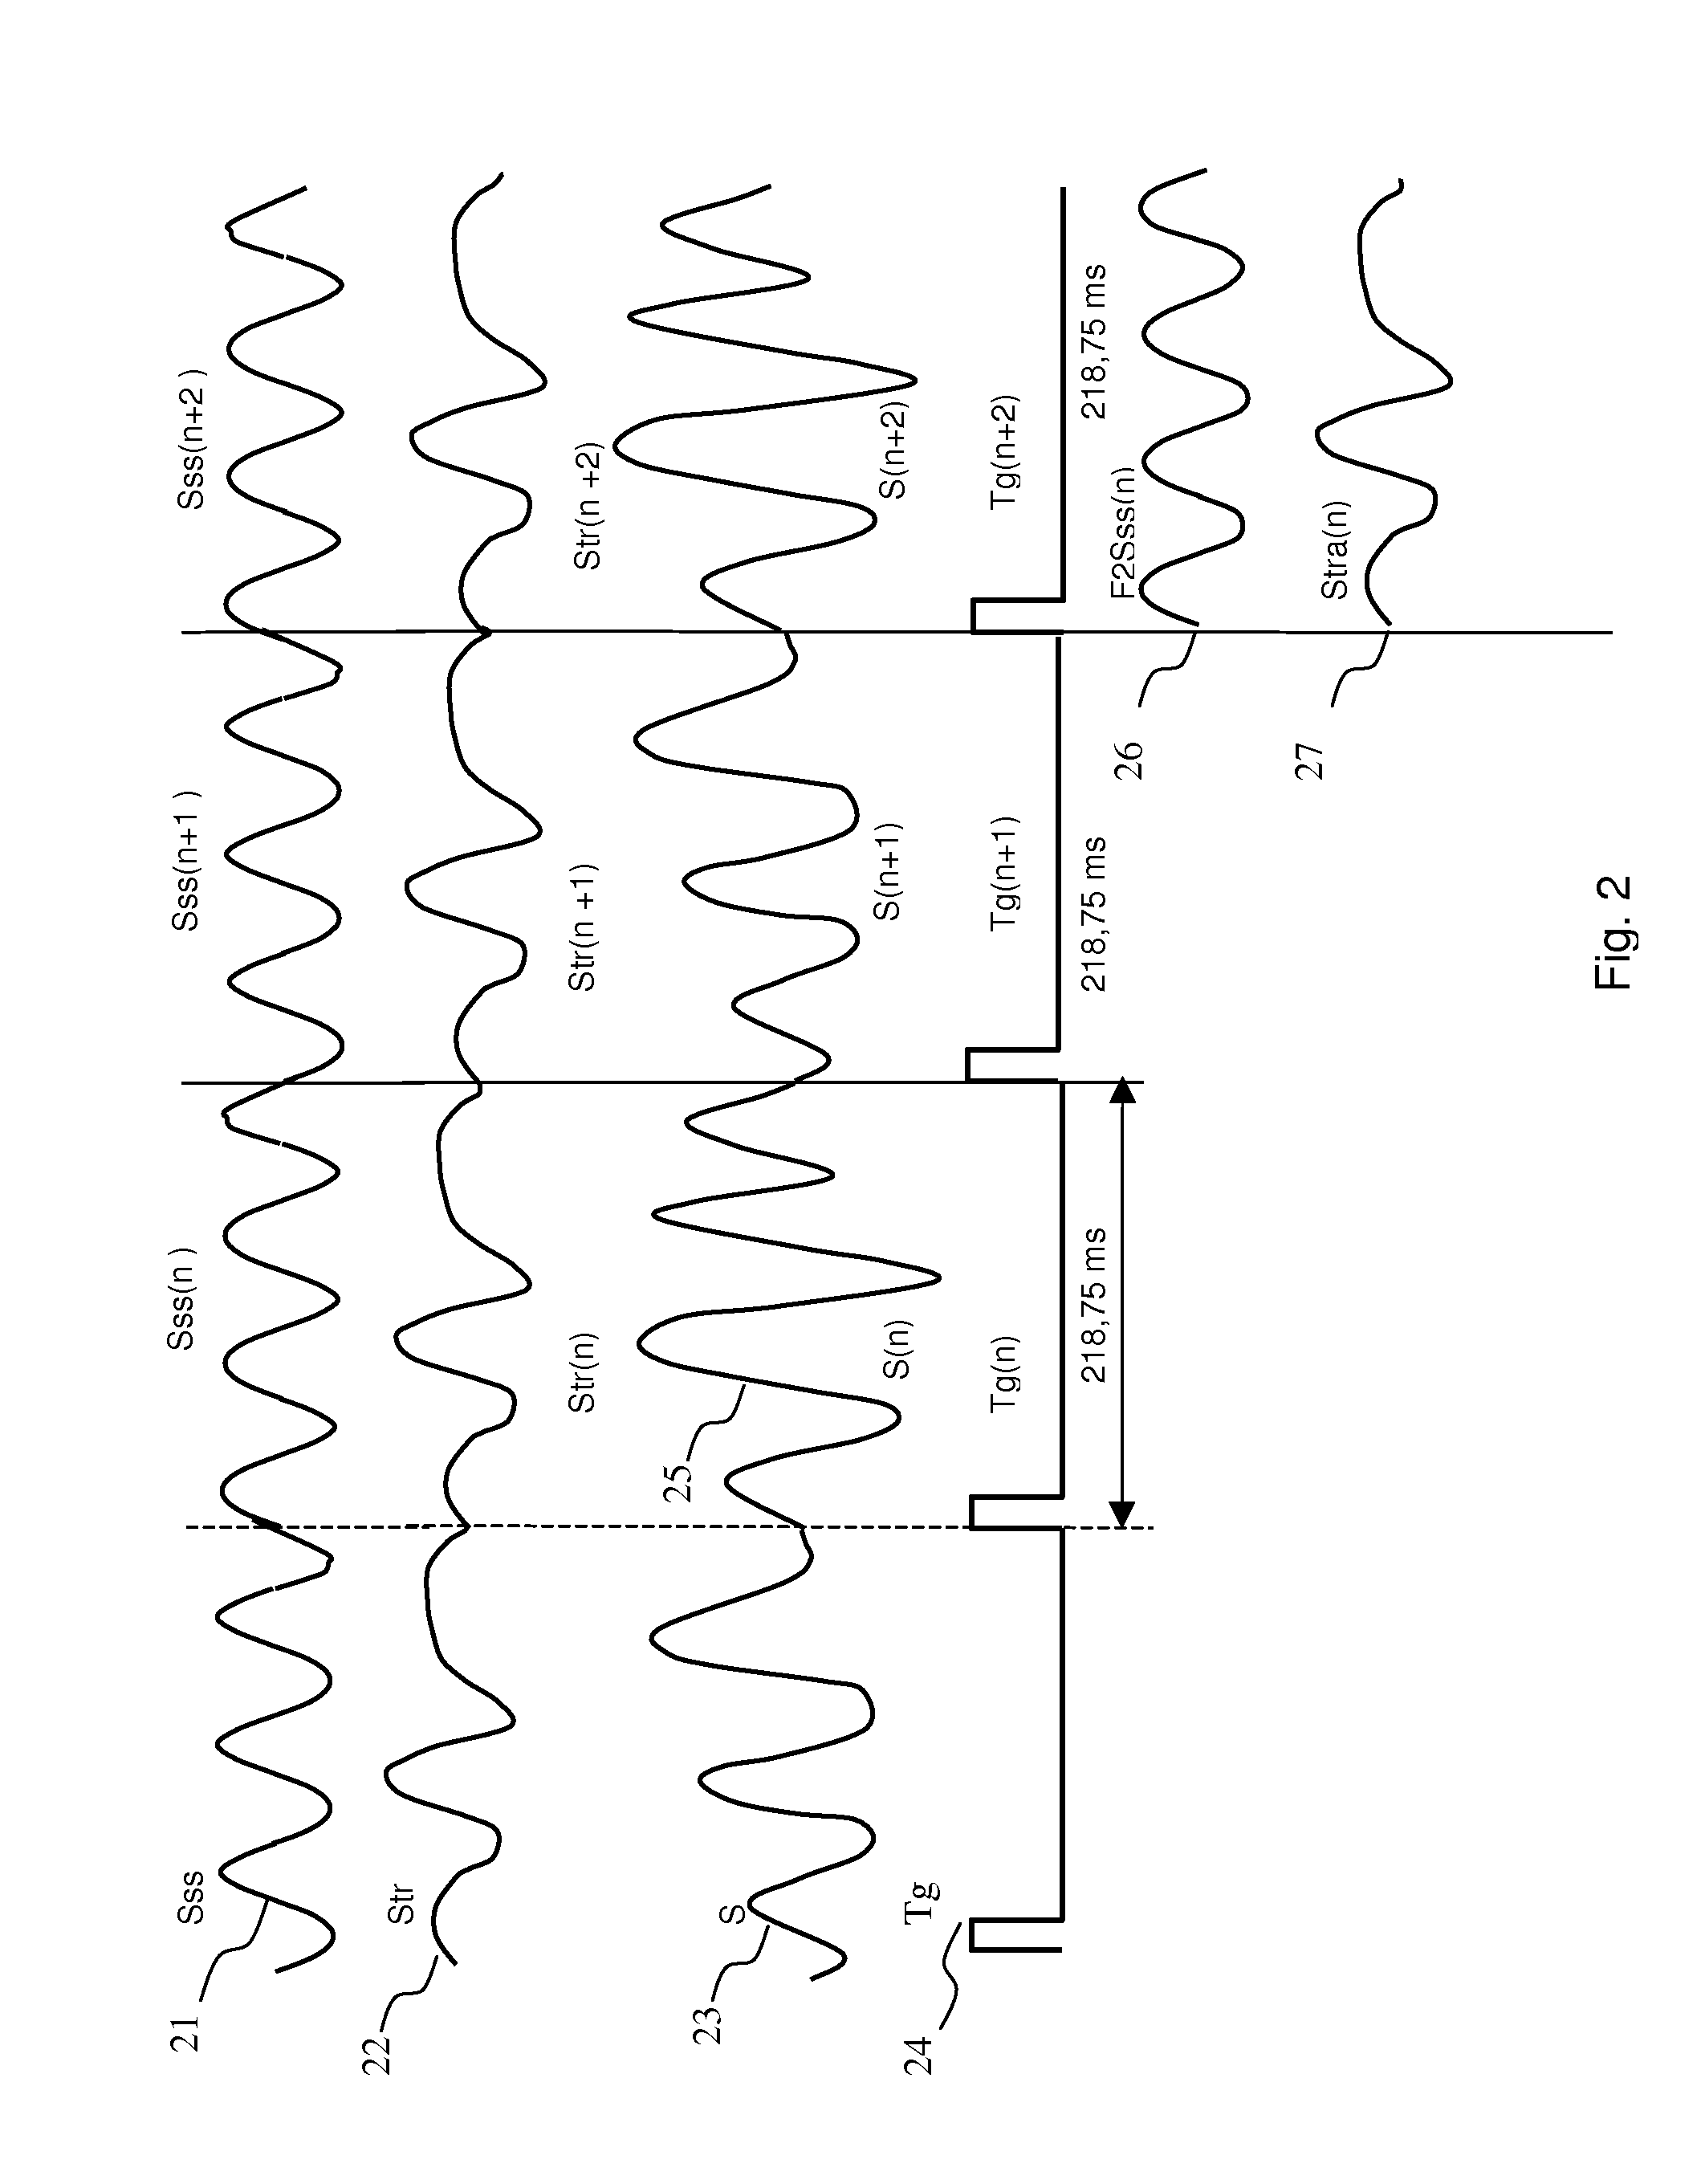 Method and apparatus for visual stimulation and recording of the pattern electroretinogram of the visual evoked potentials